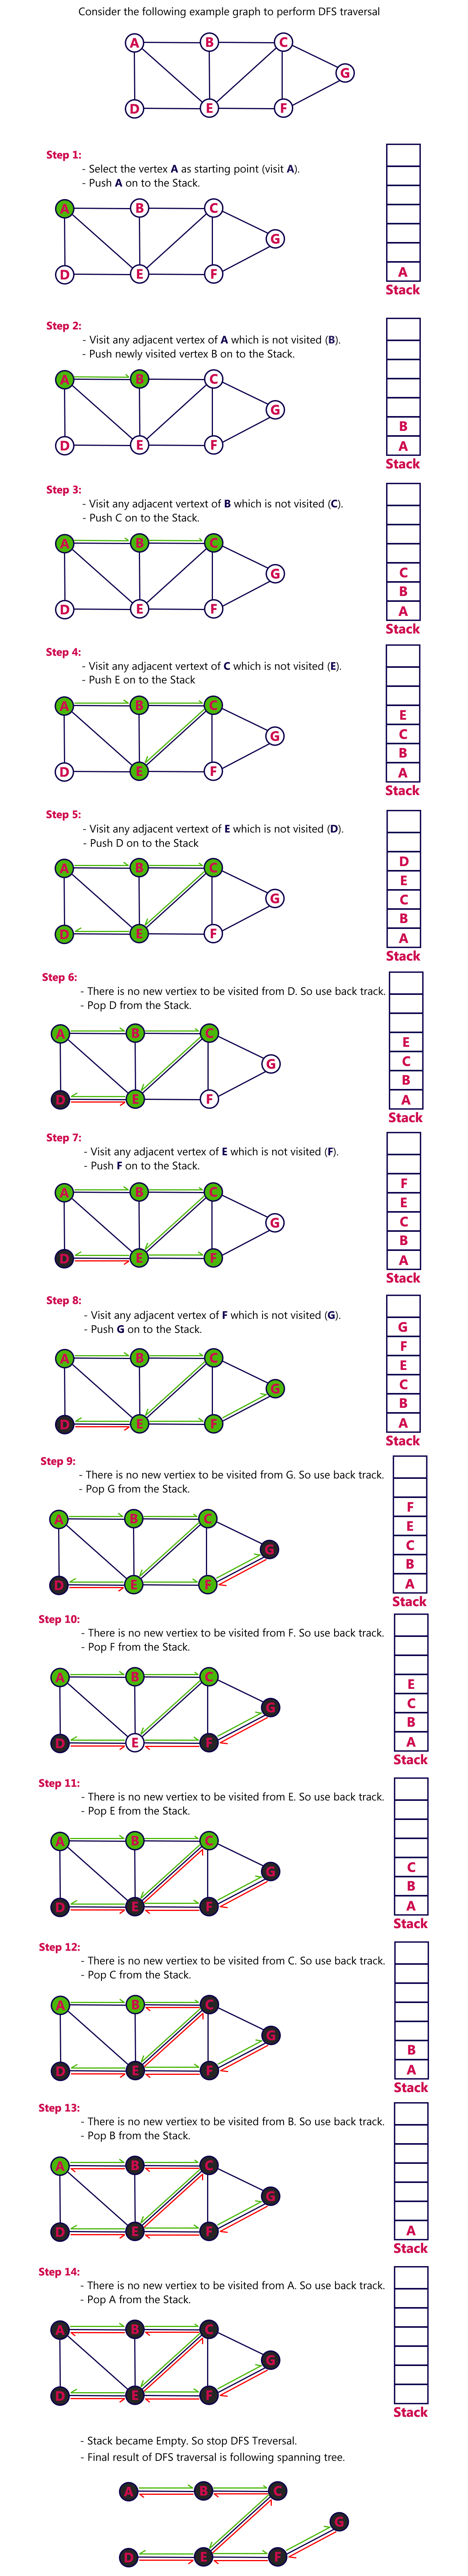 Depth-First Search Algorithm: Graph or Tree traversal and search